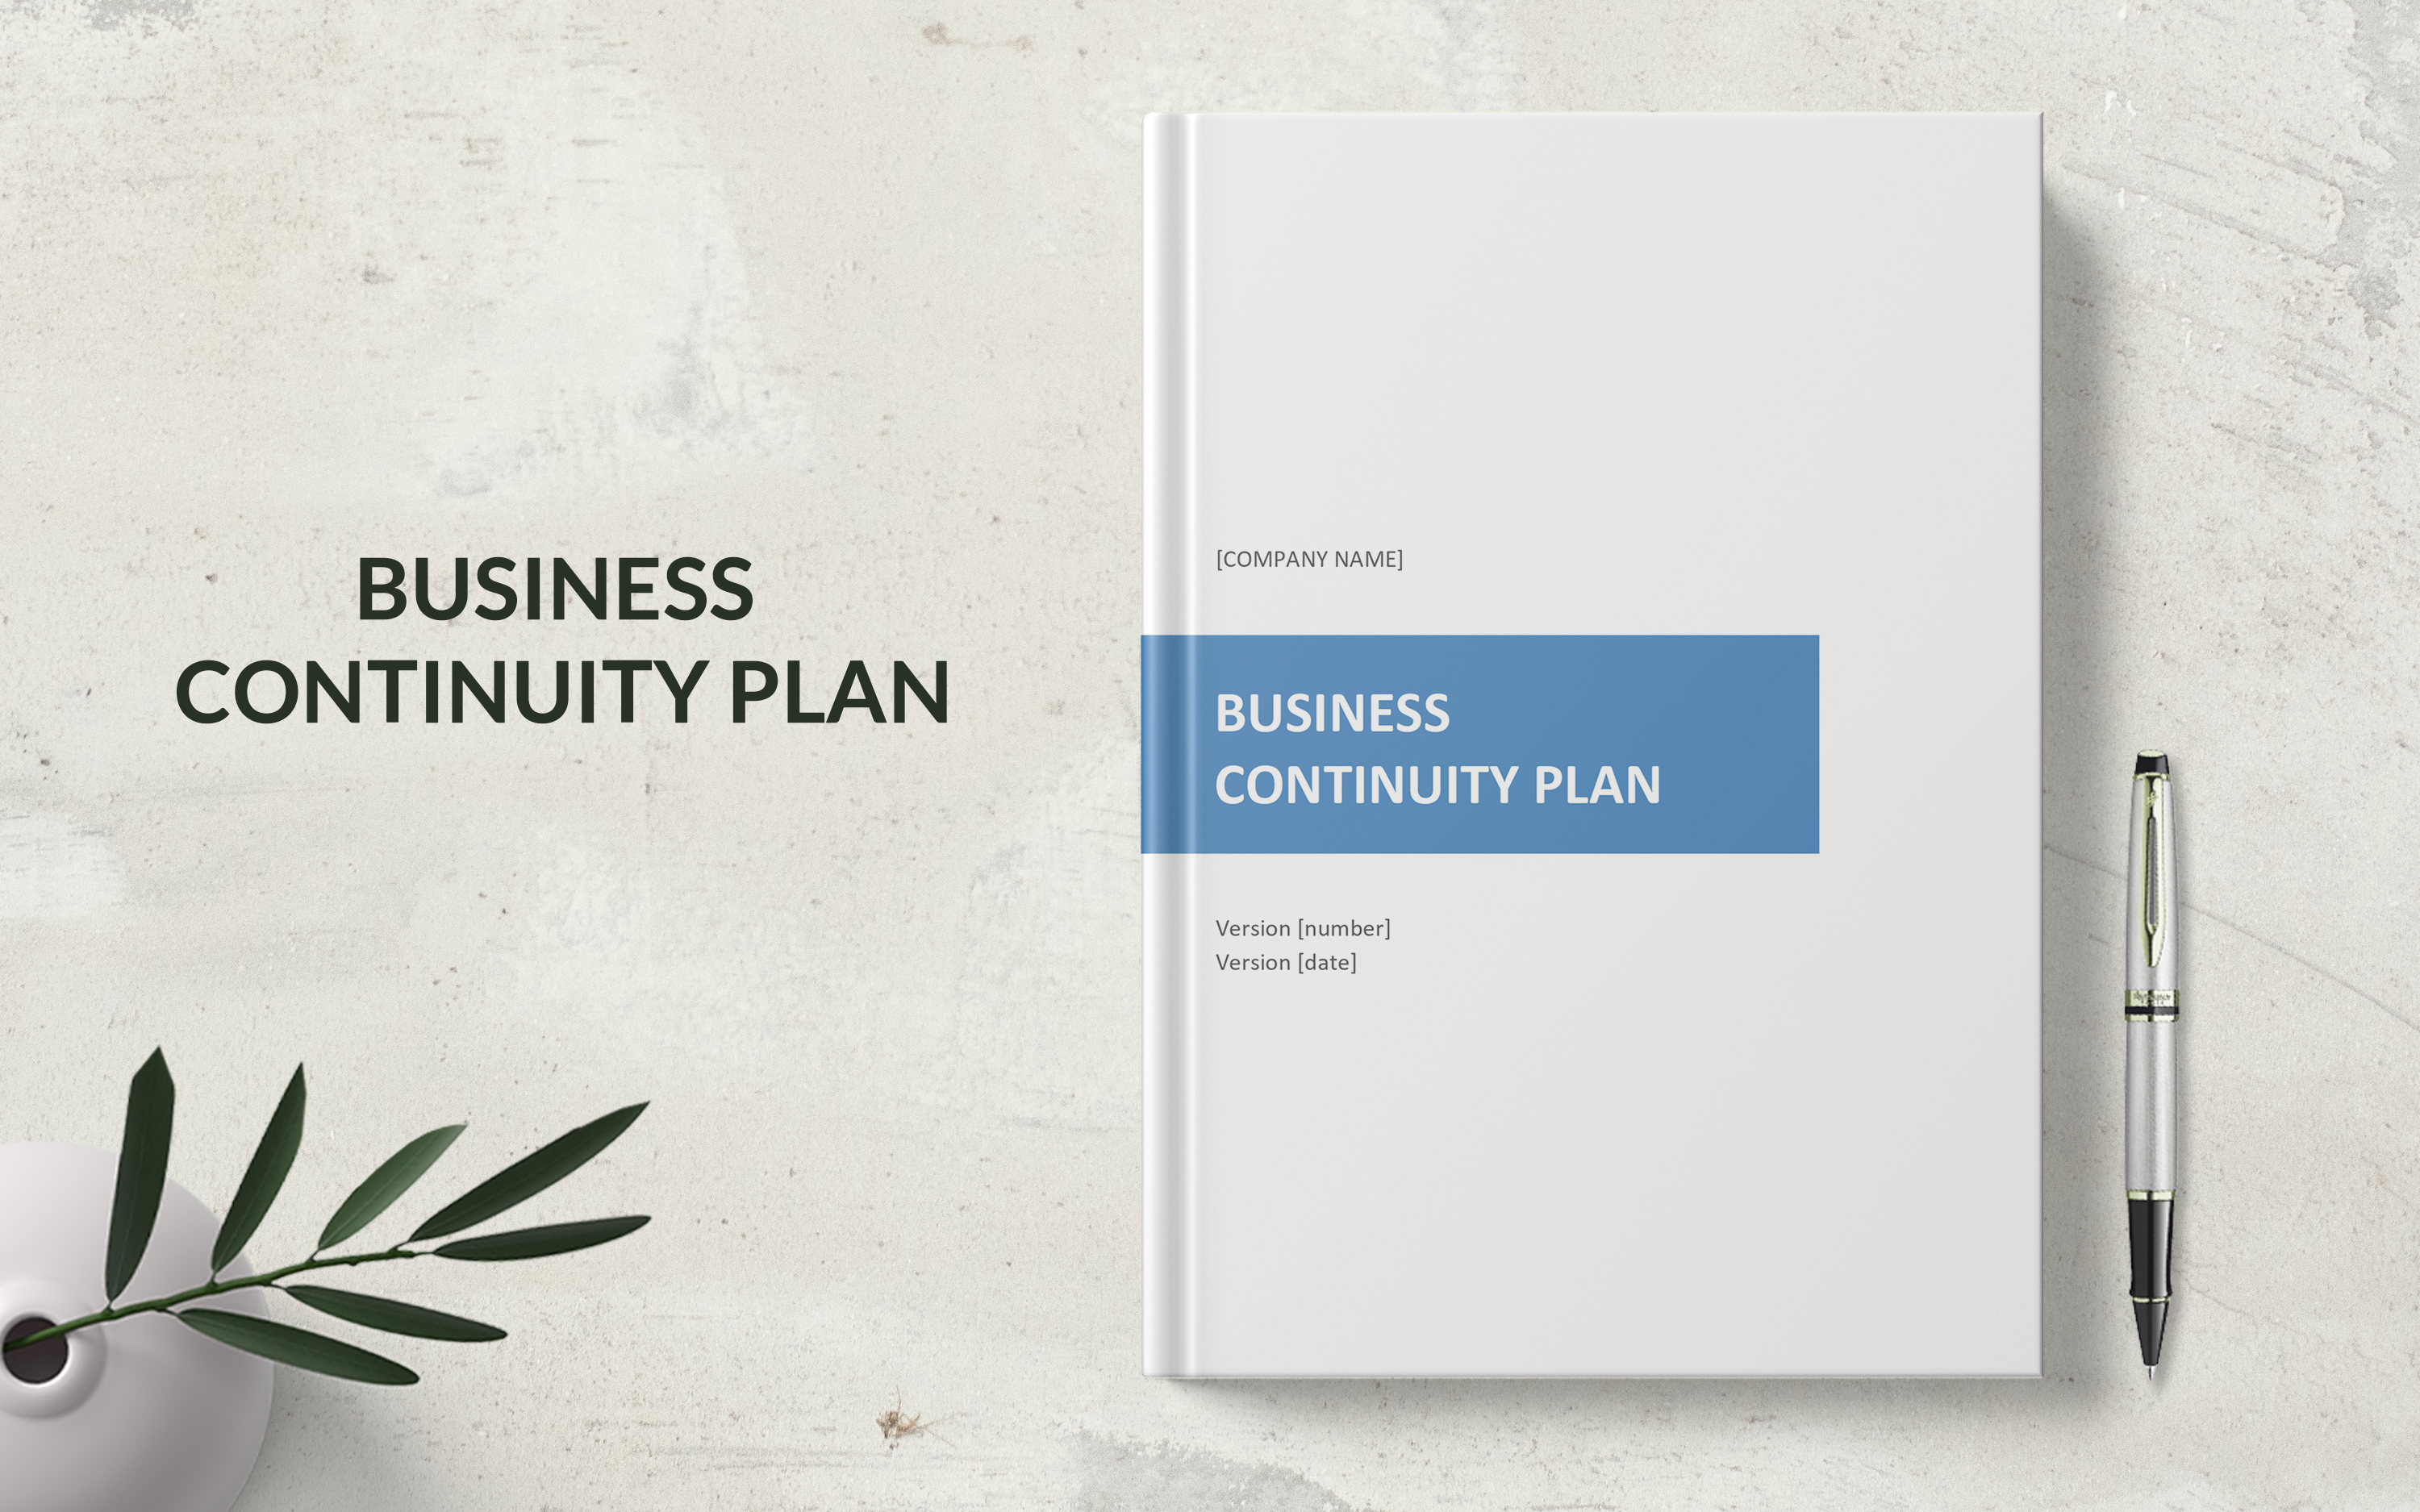 Business Continuity Plan Template